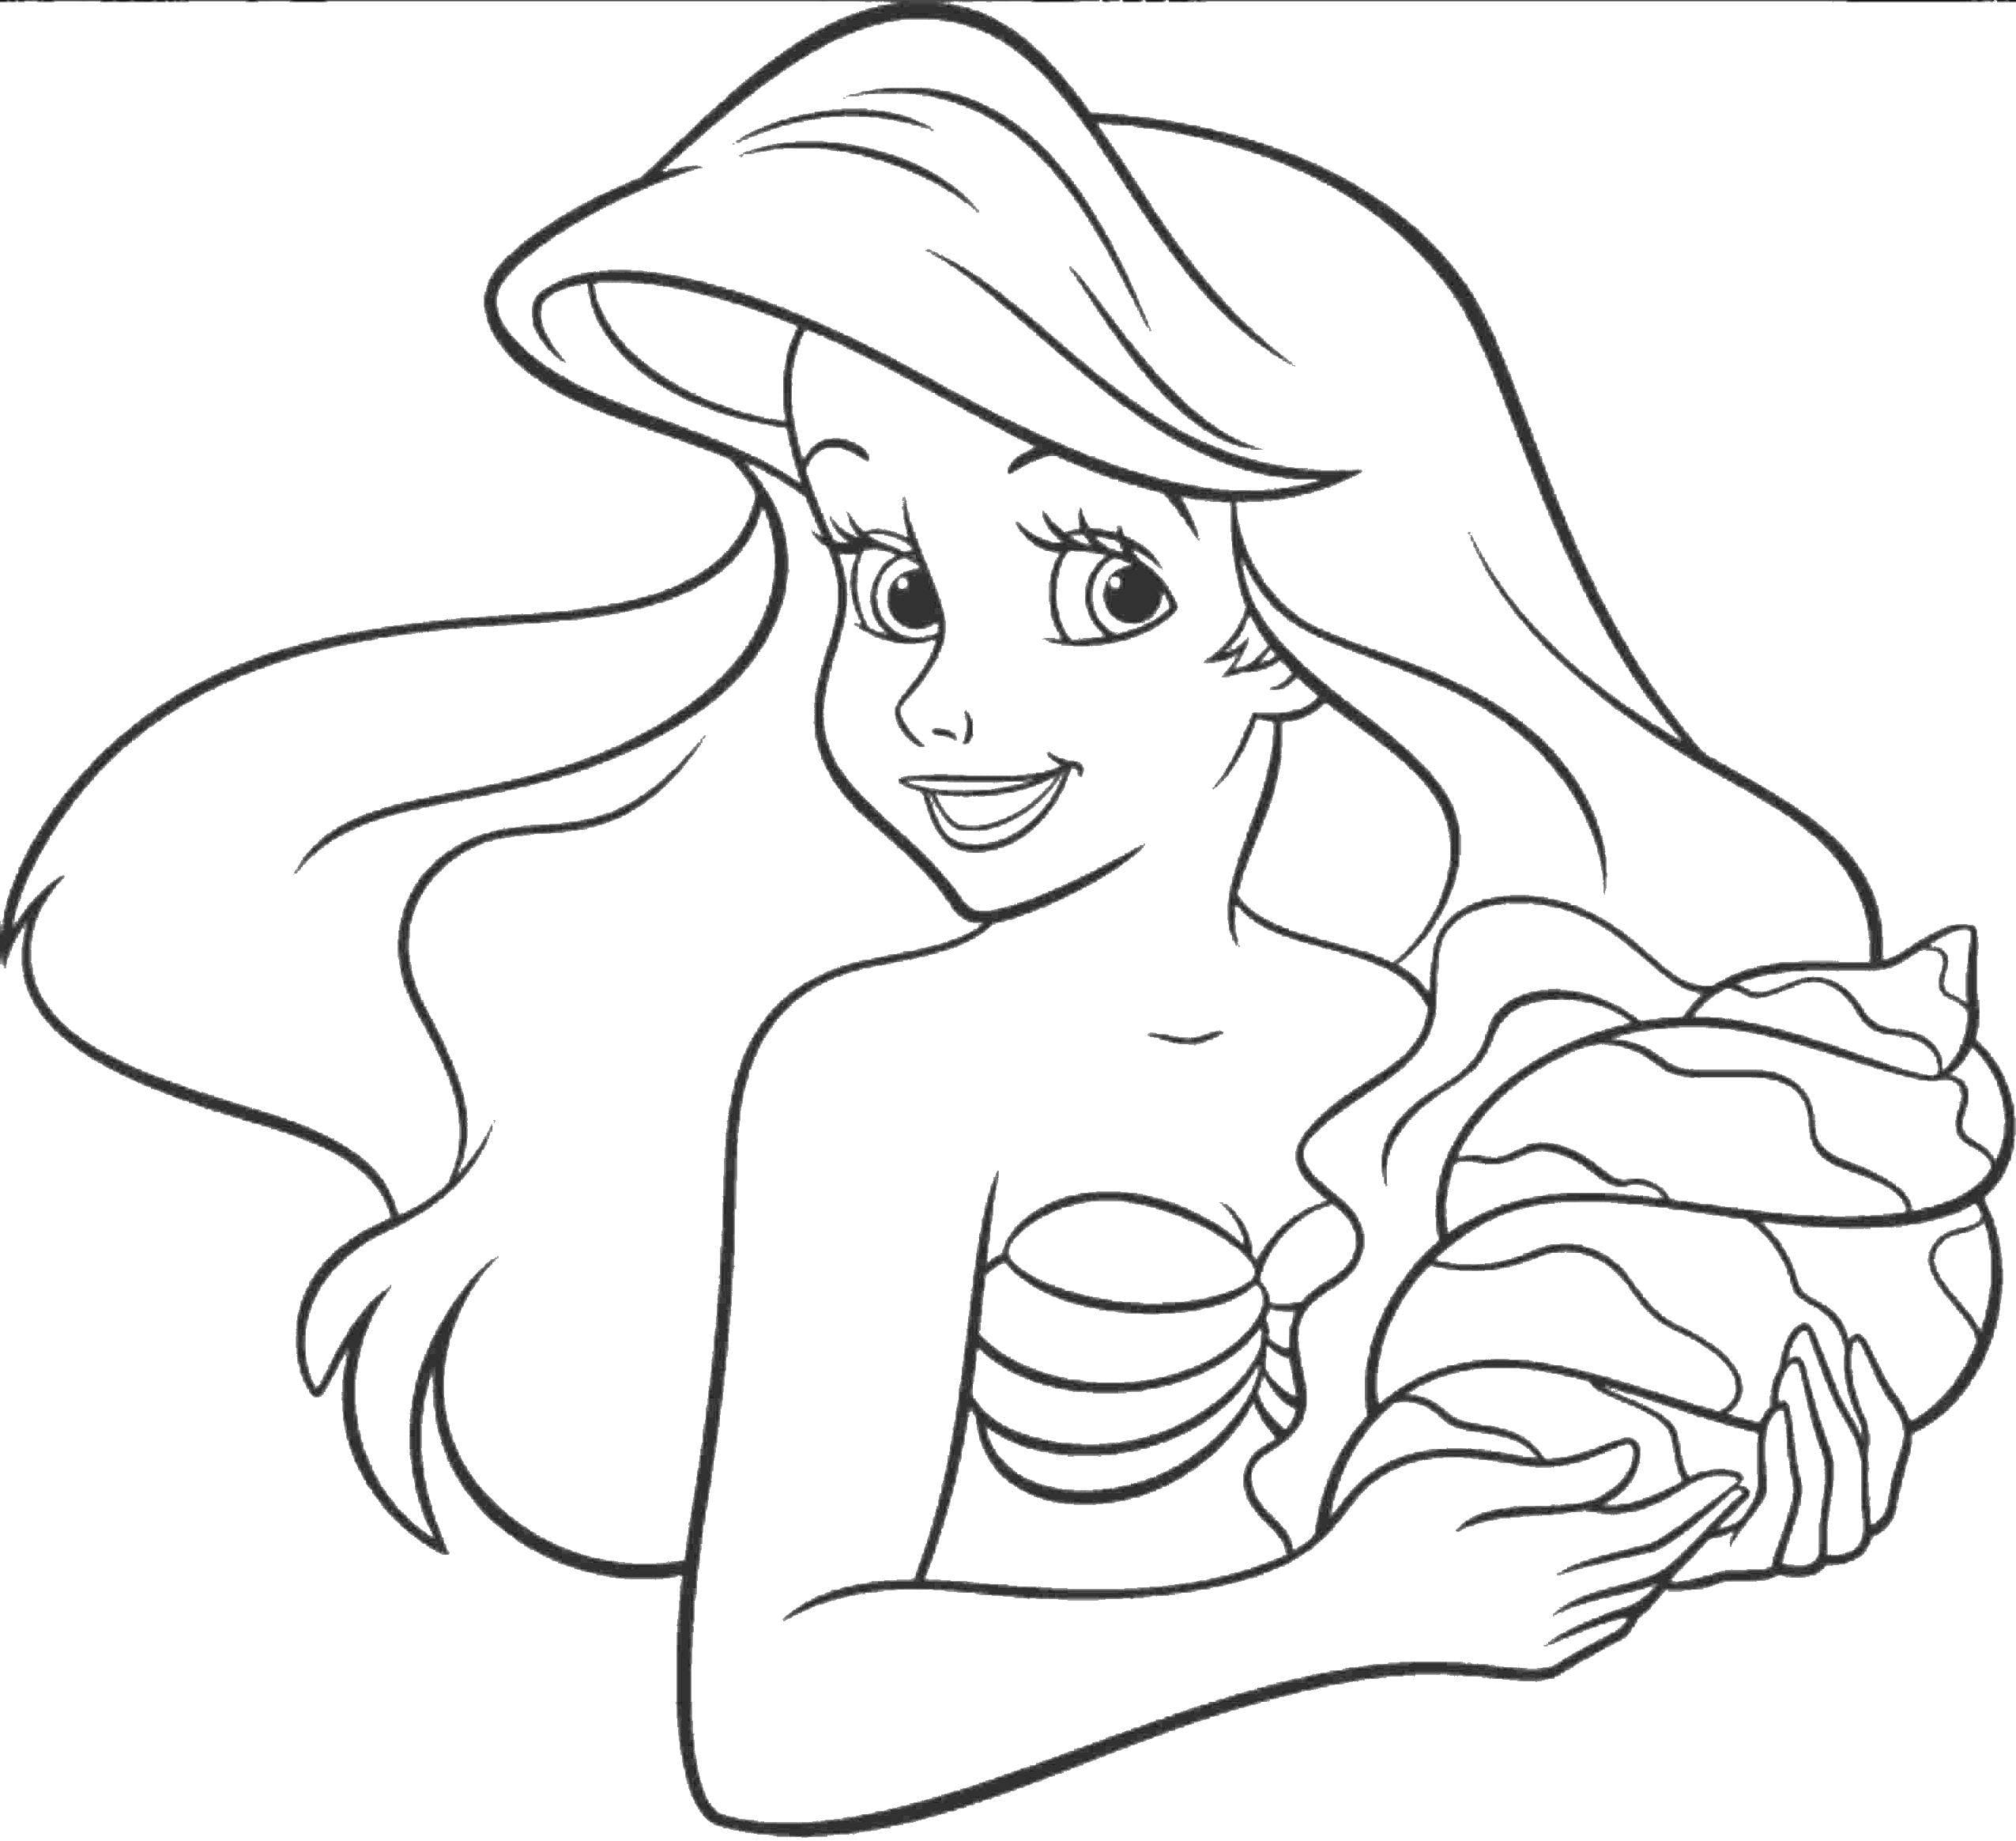 Ariel 29 from The Little Mermaid coloring pages to print and coloring